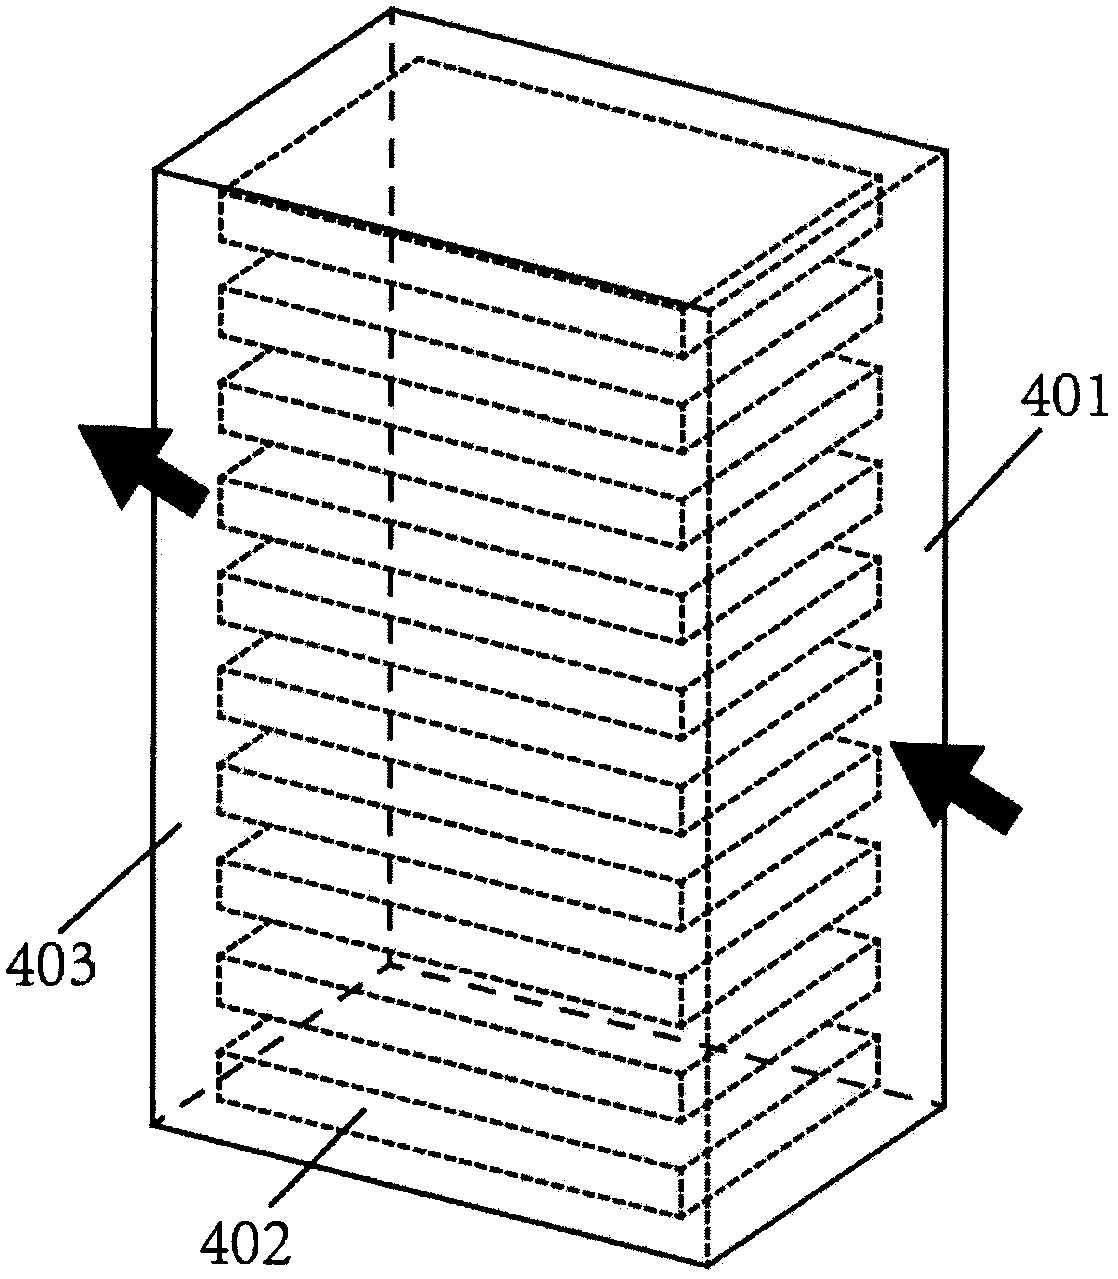 Floor air supplying data center air conditioning system integrated with T-type tree-shaped air supplying pipeline system